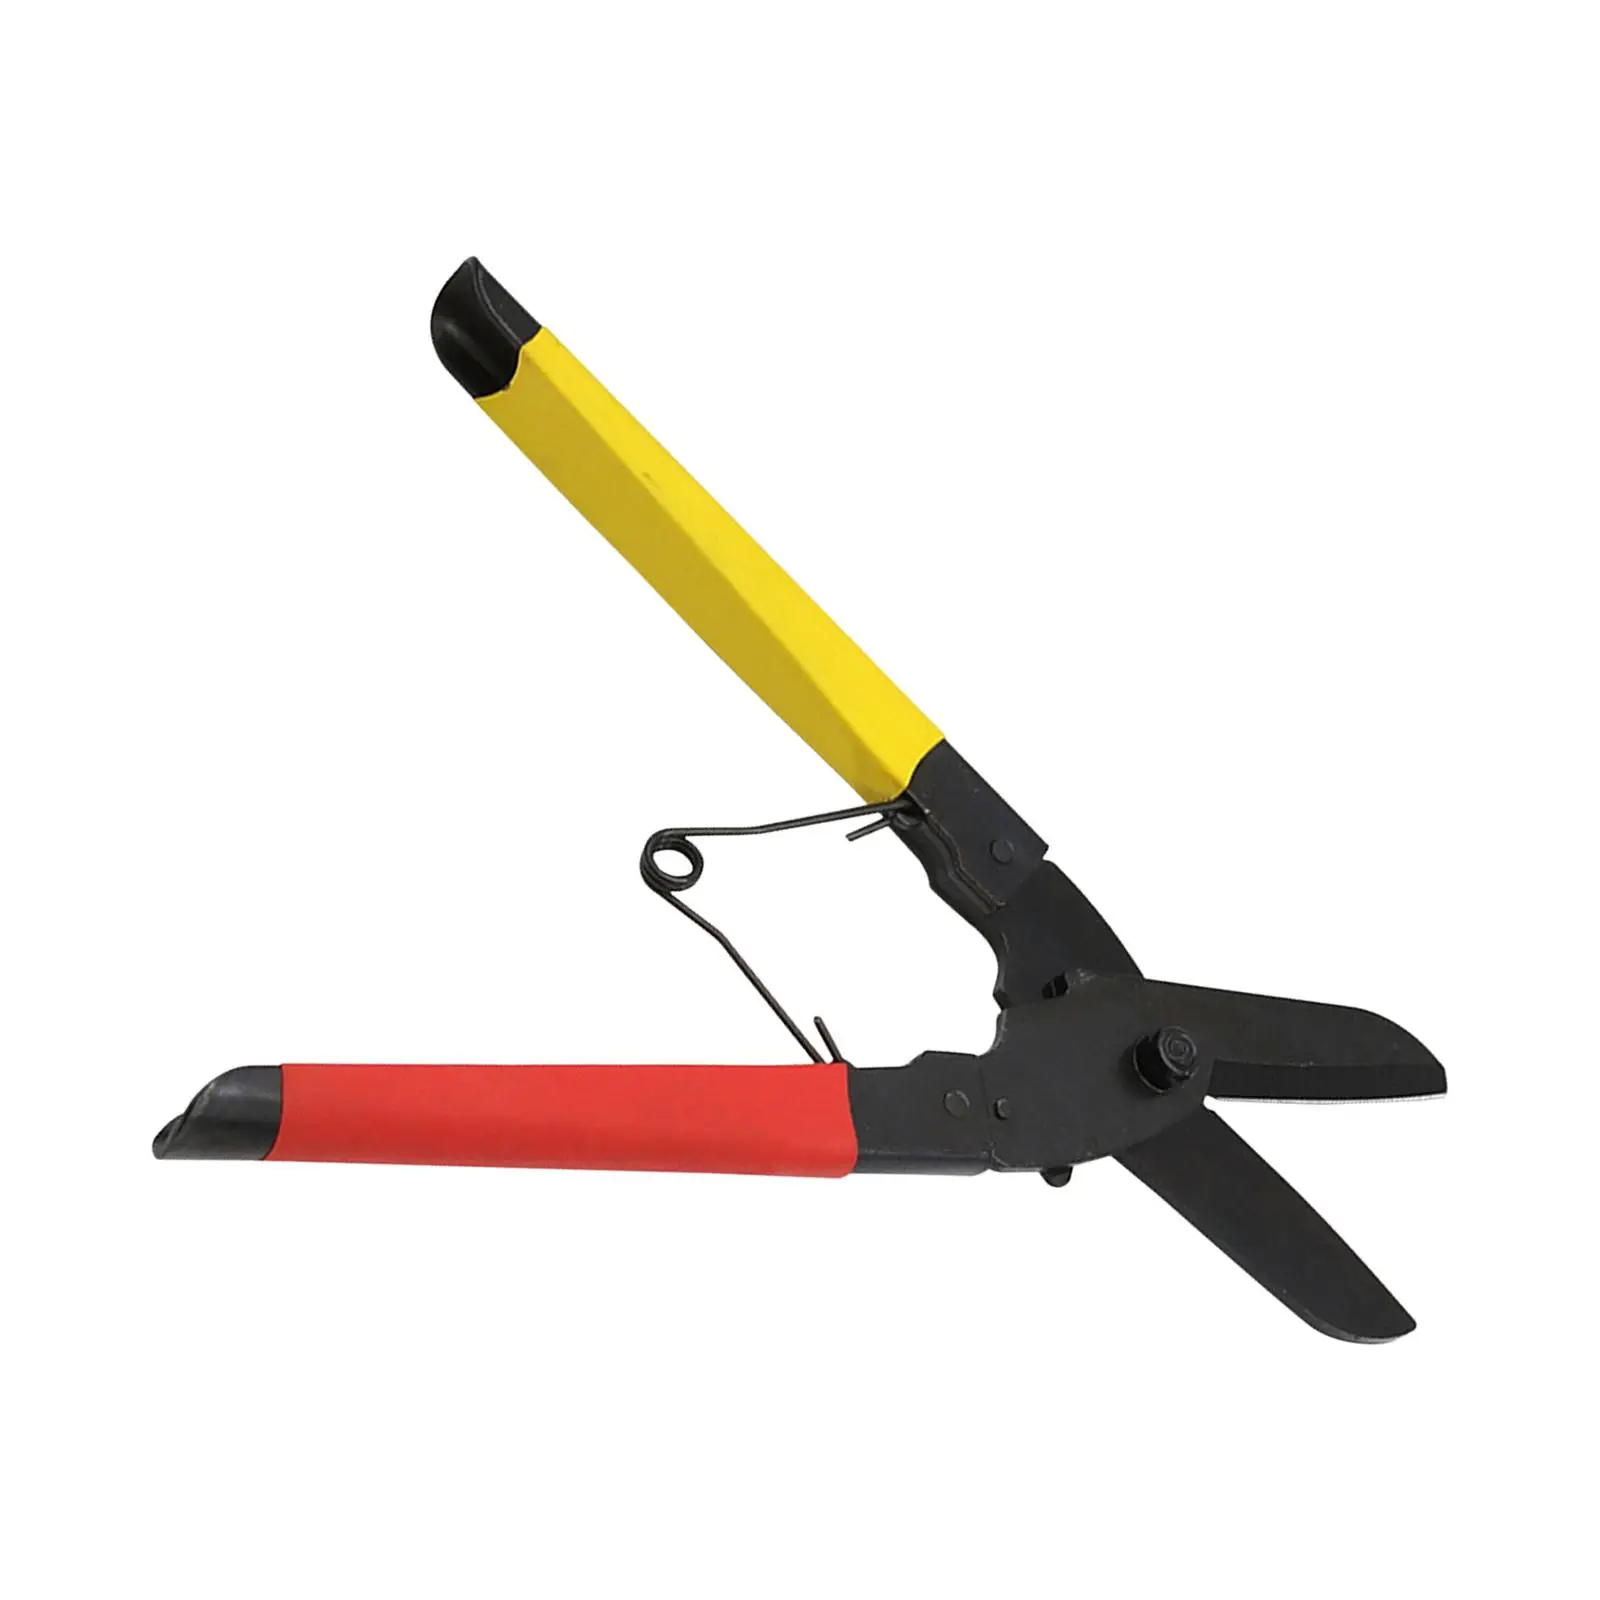 Heavy Duty Hand Shear Ergonomic Handle Industrial Grade Scissors for Plate Cables Thin Metal Plate Cardboard Carpet